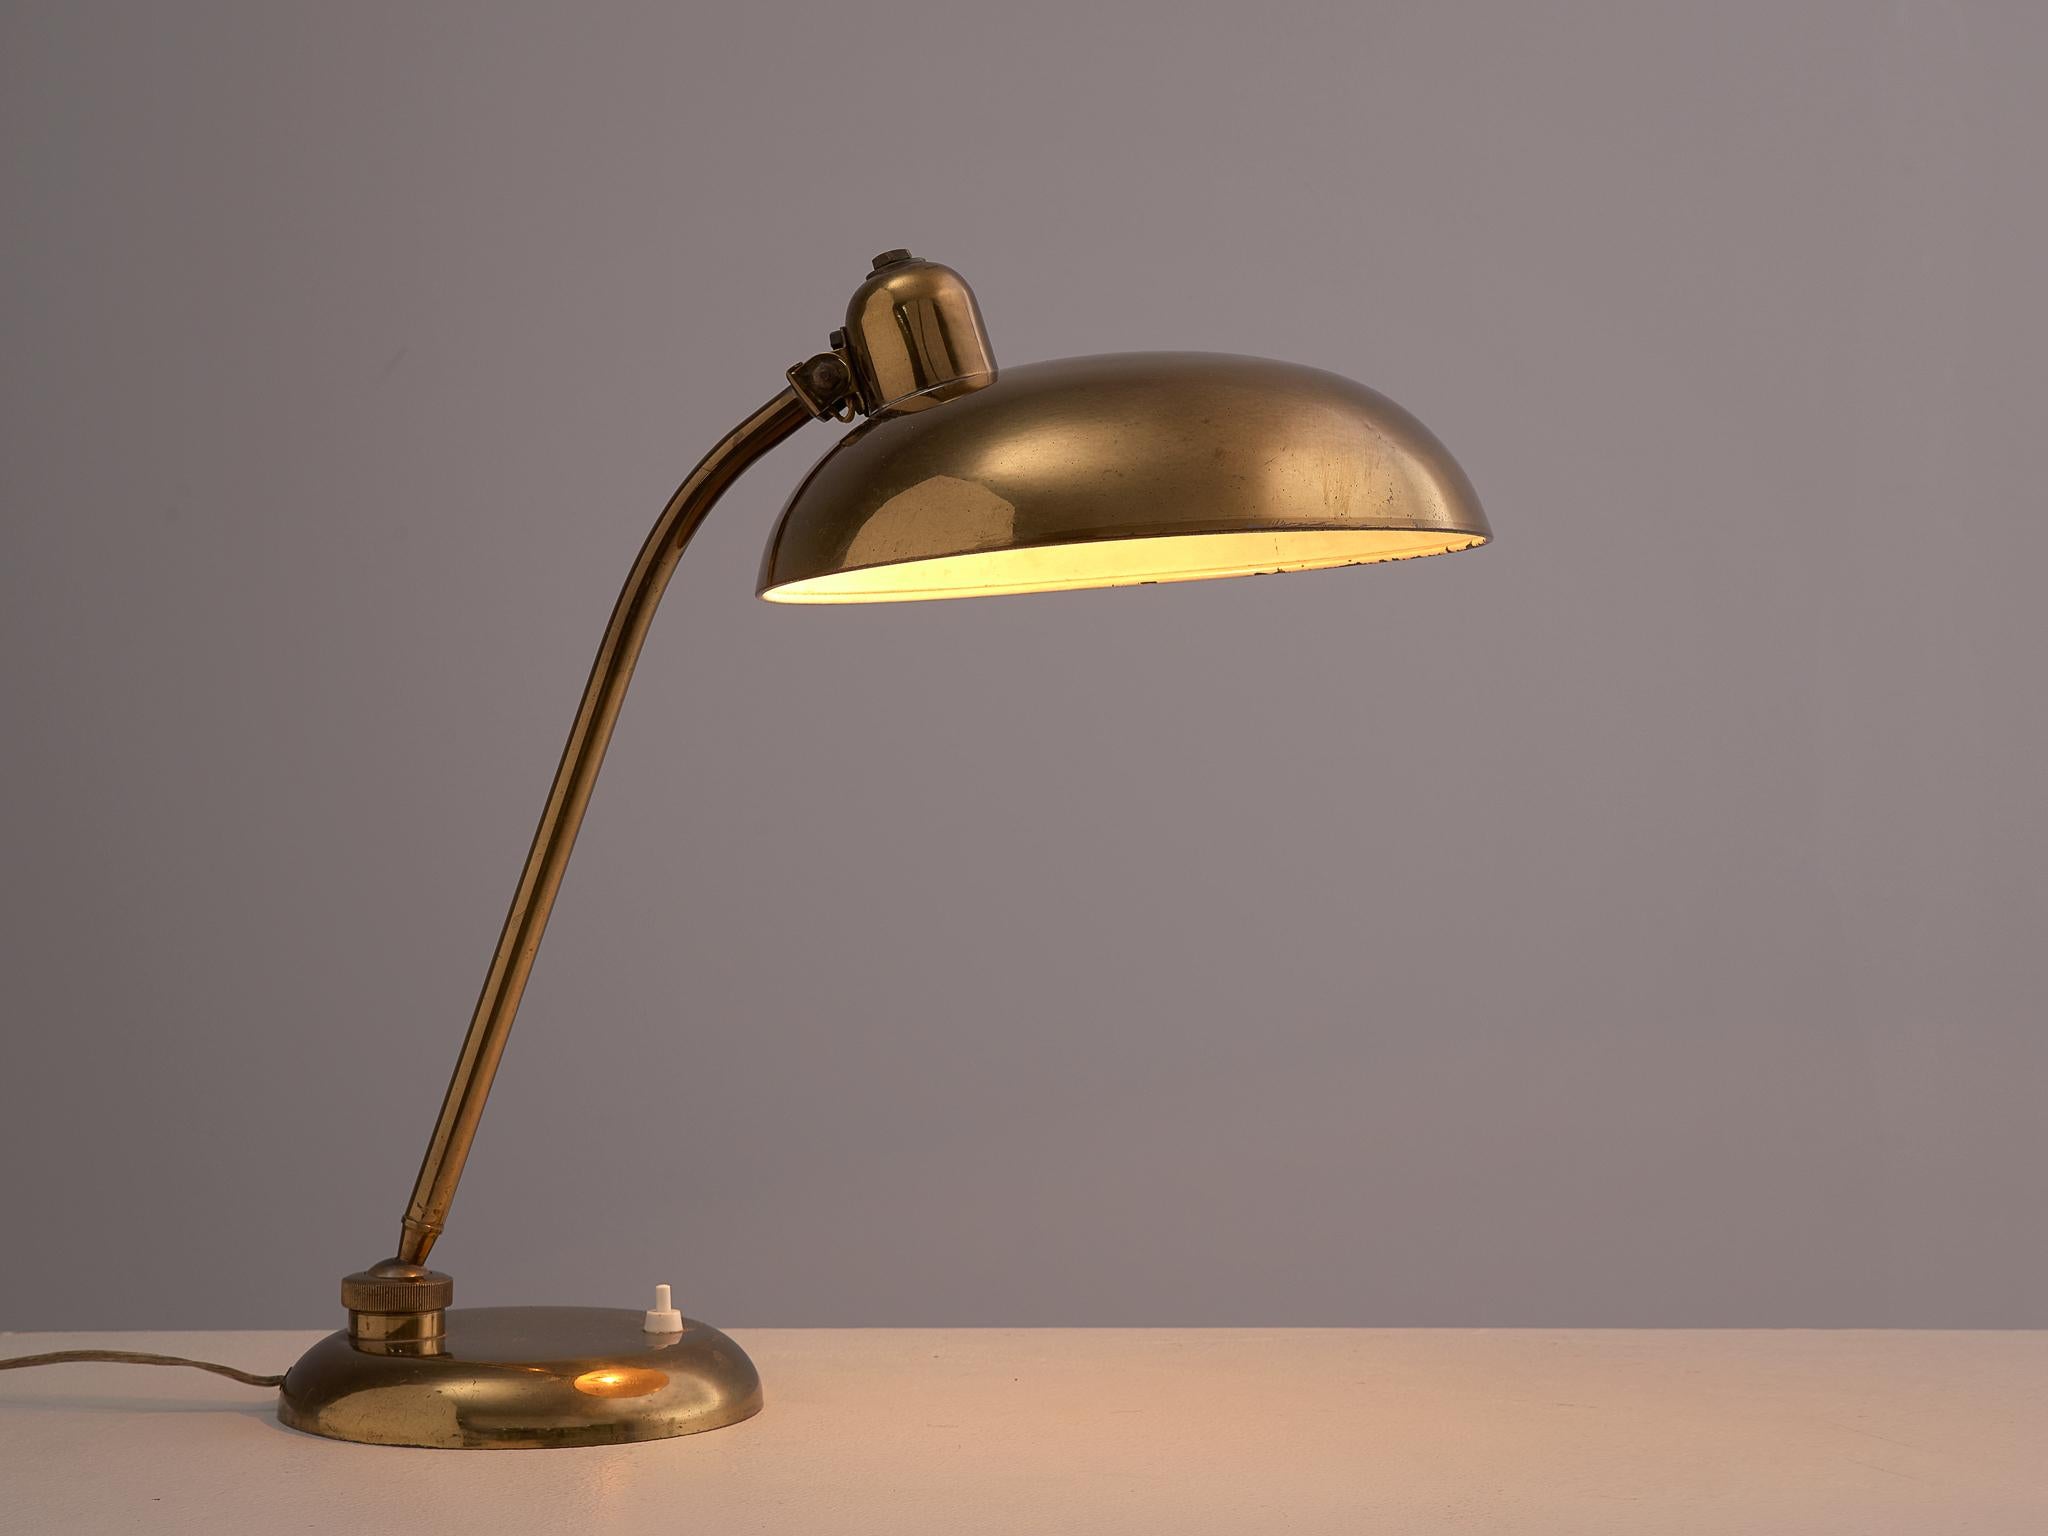 Desk light, brass, Italy, 1960s

Stylish table lamp in an admirable patinated brass. The disc-shaped shade is held up by the slim stern, which has a pivot point at the top and at the bottom for easy use. Finished with a round foot. The brass gives